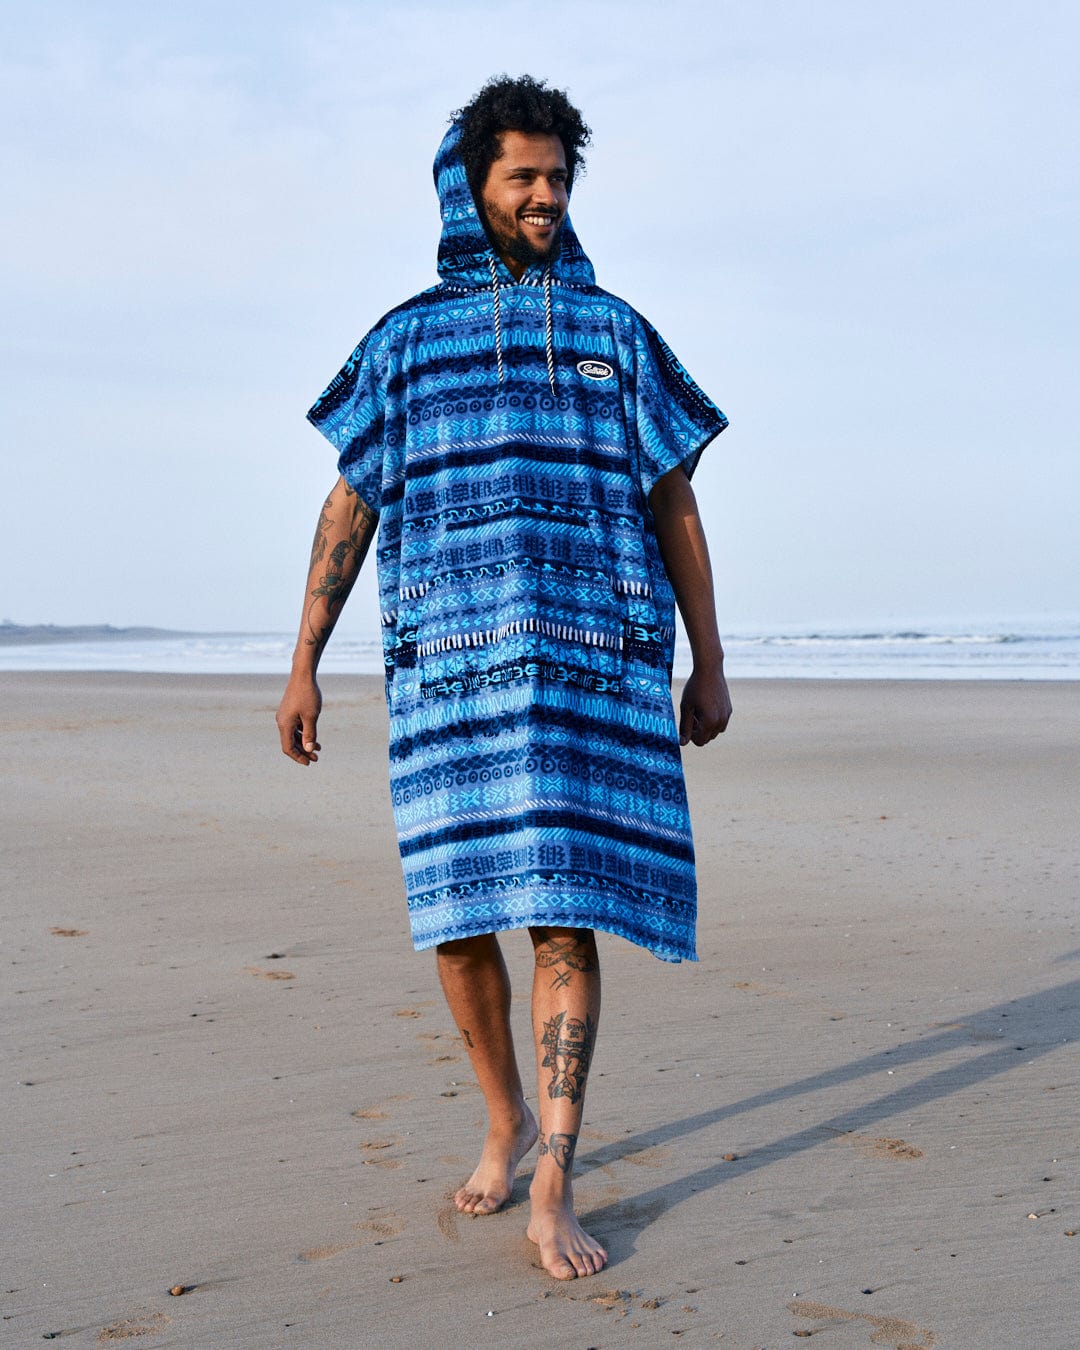 A man with a beard and tattoos smiles while wearing a Saltrock Marks Changing Towel in Blue on a sandy beach.